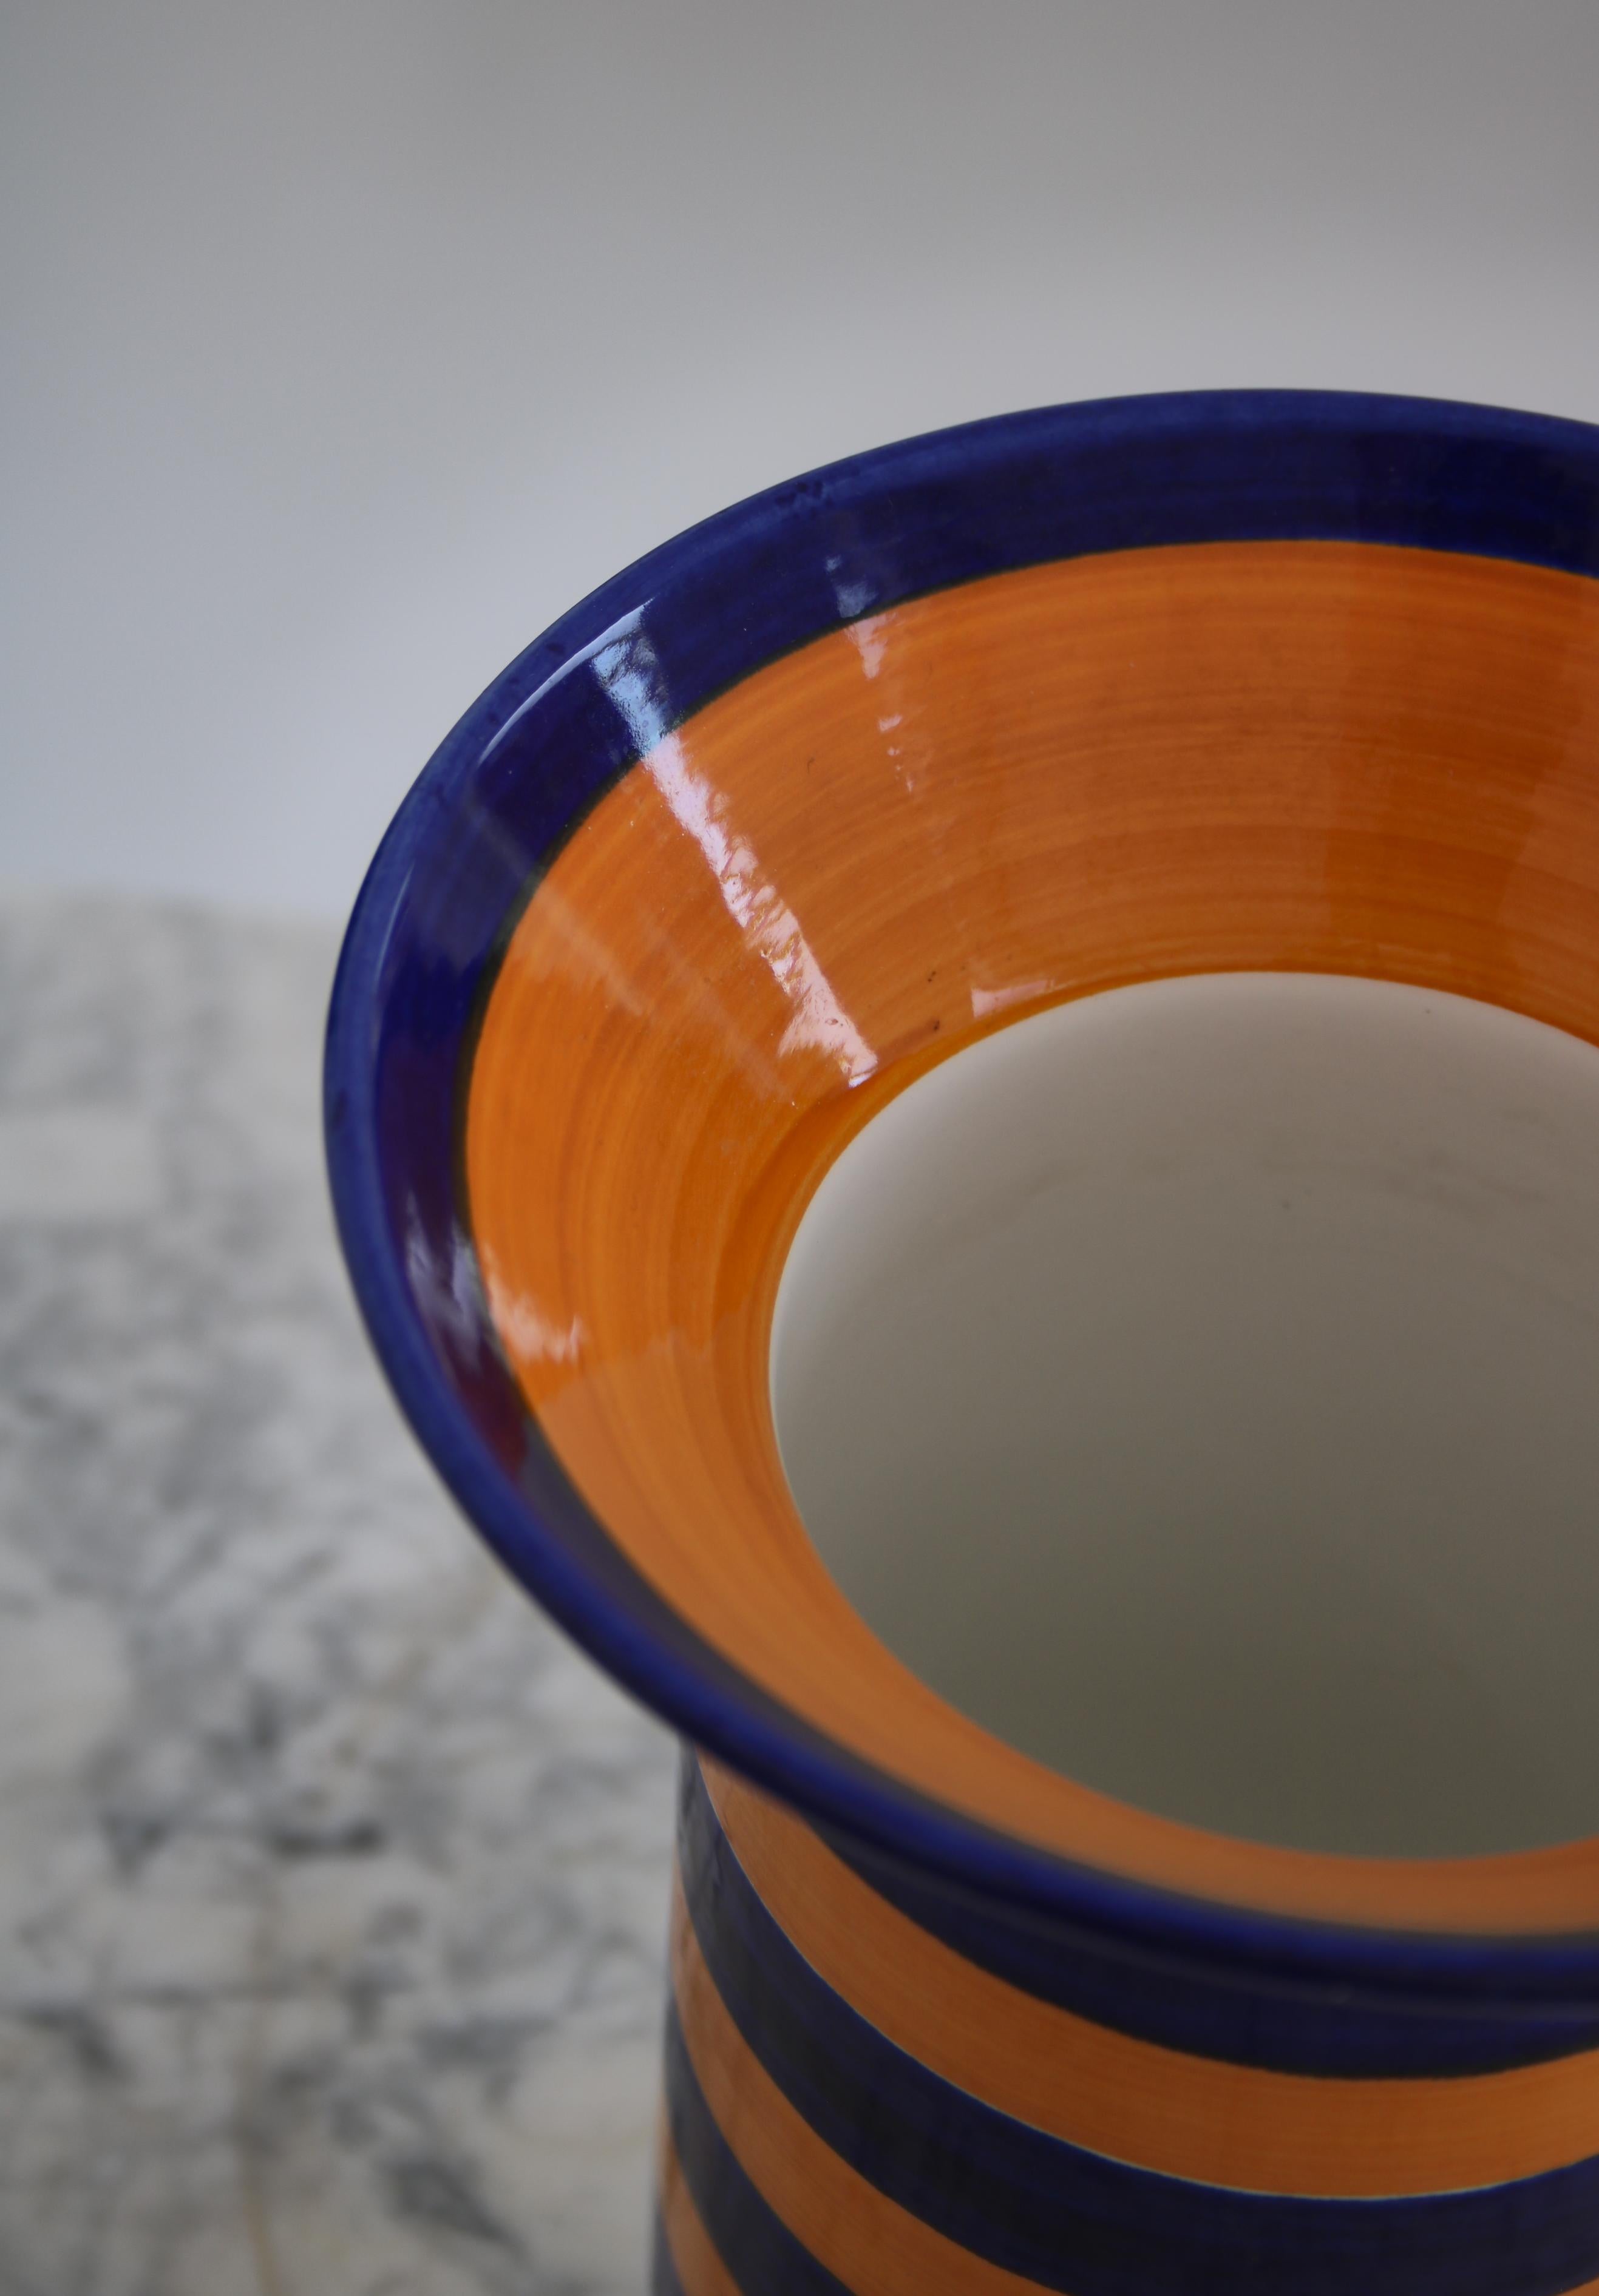 Wonderful hand painted flintware vase by Marianne Westmann for Rörstrand, Sweden. Decorated with a vivid white glazing and blue and orange stripes. Stamped underneath.

Marianne Westman (1928–2017) designed many Scandinavian Modern classics for